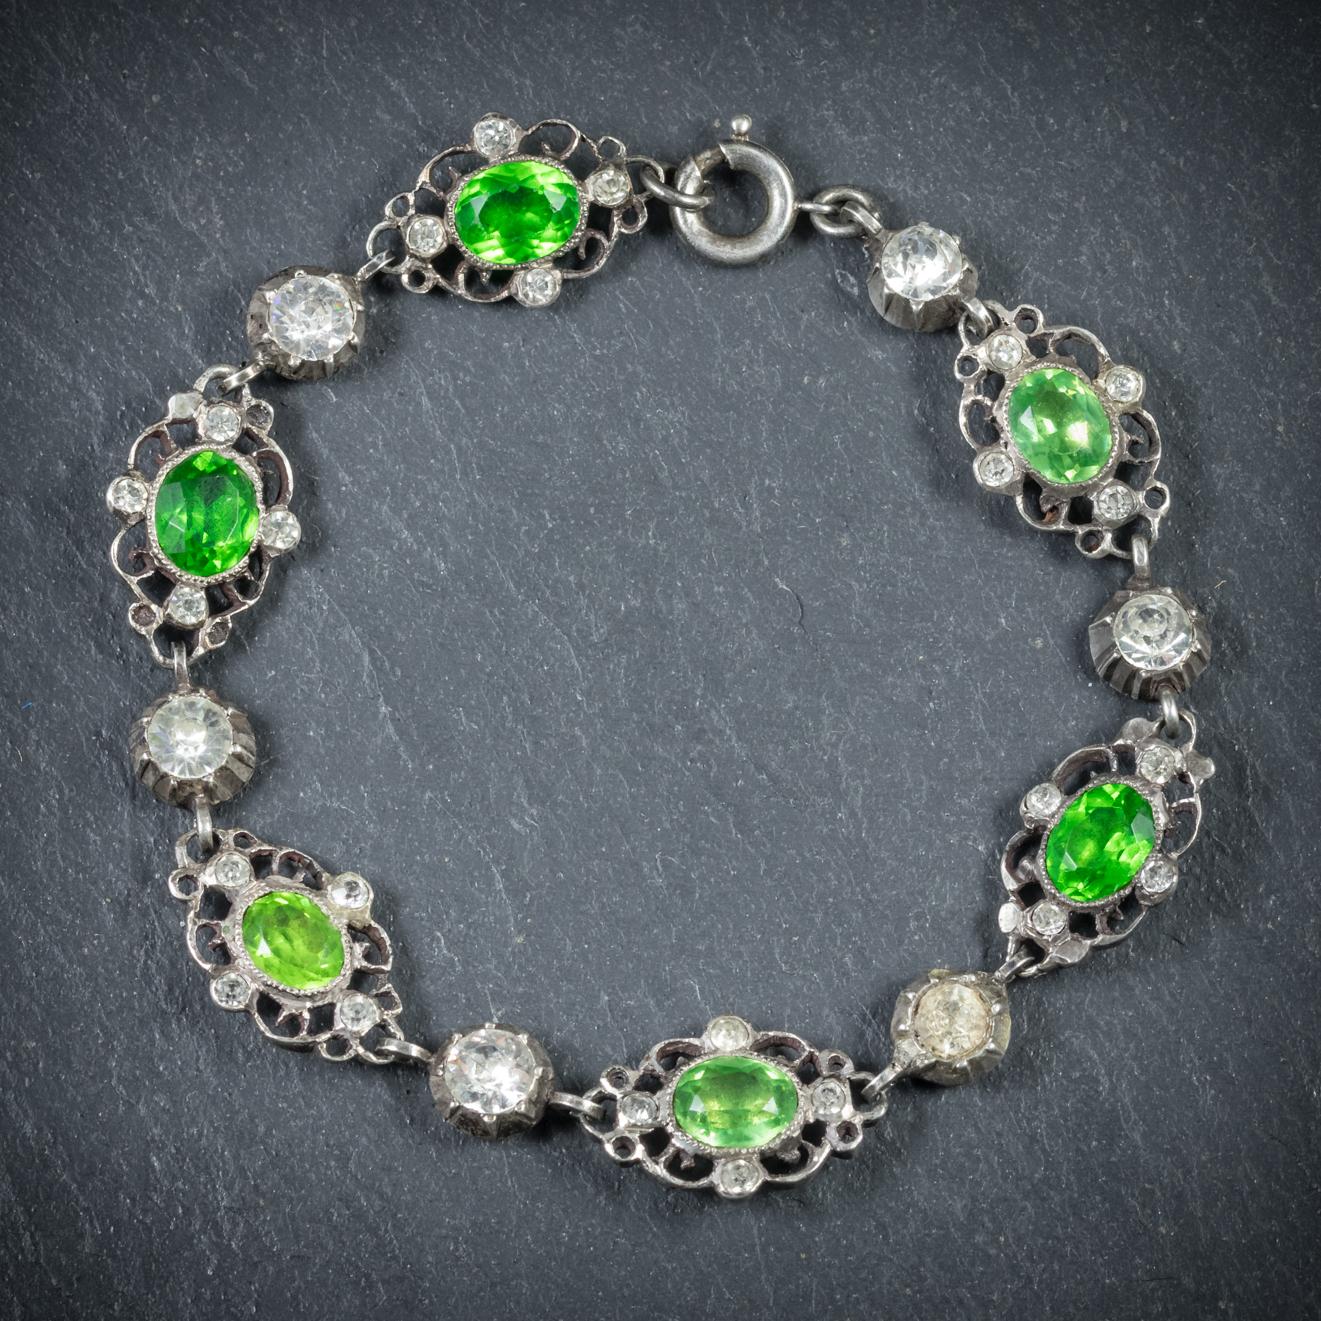 This beautiful antique Paste stone bracelet is from the Victorian era, Circa 1900

Decorated with sparkling, white Paste Stones and larger grassy green Pastes that emulate Peridots 
All set in Silver with expert, detailed workmanship displayed